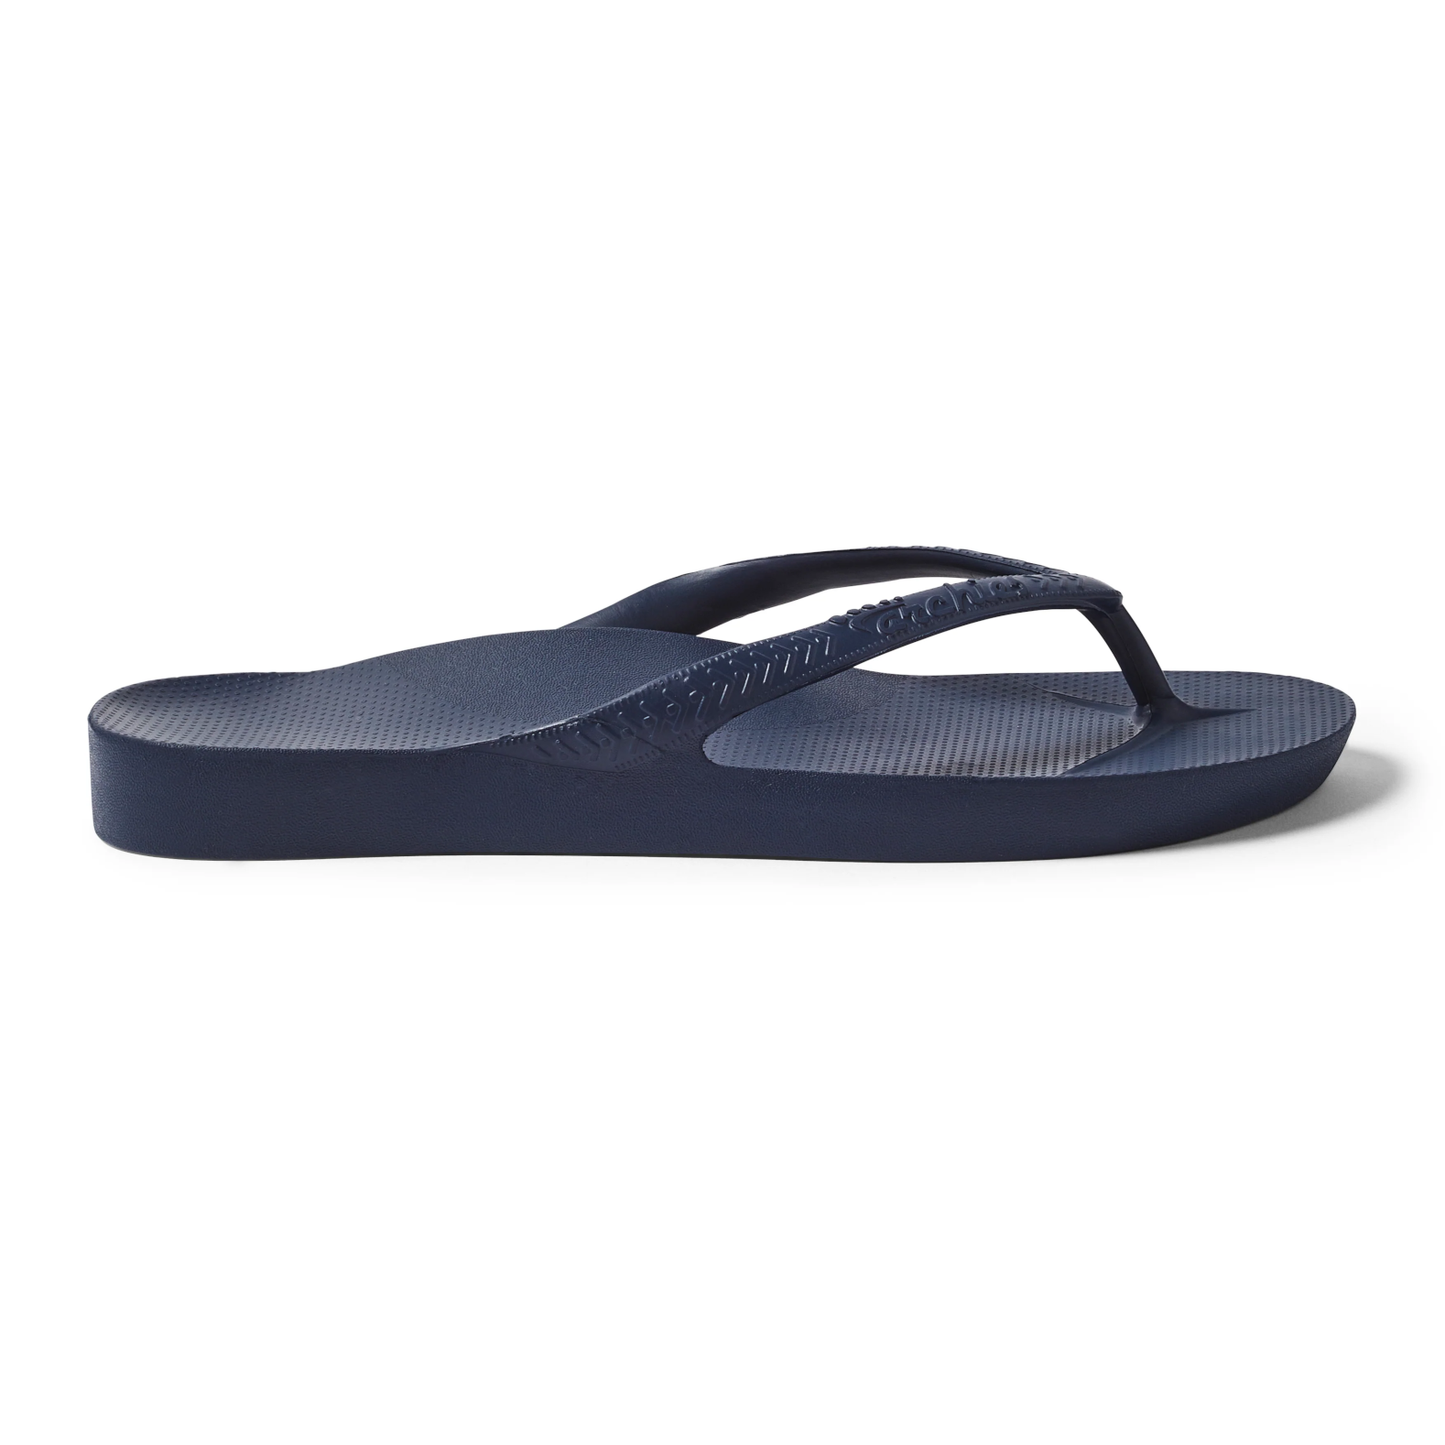 Arch Support Jandals Navy